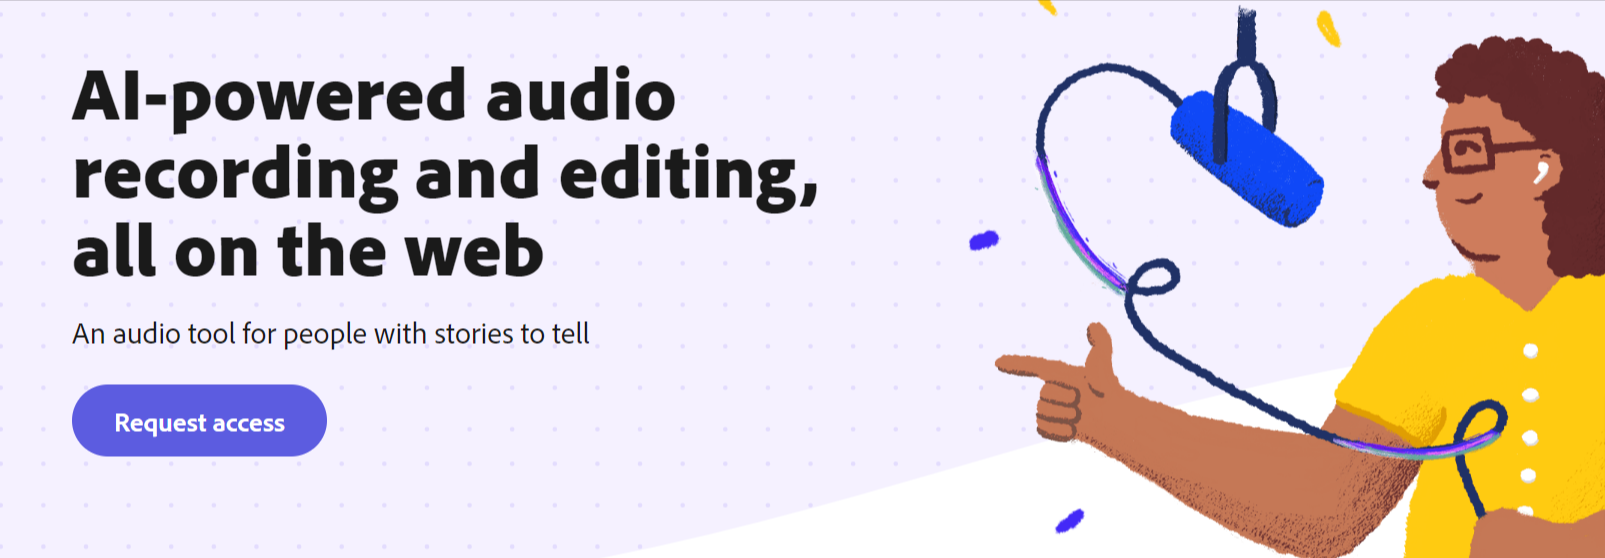 Ai powered audio recording and editing tools for podcasting by Adobe Podcast